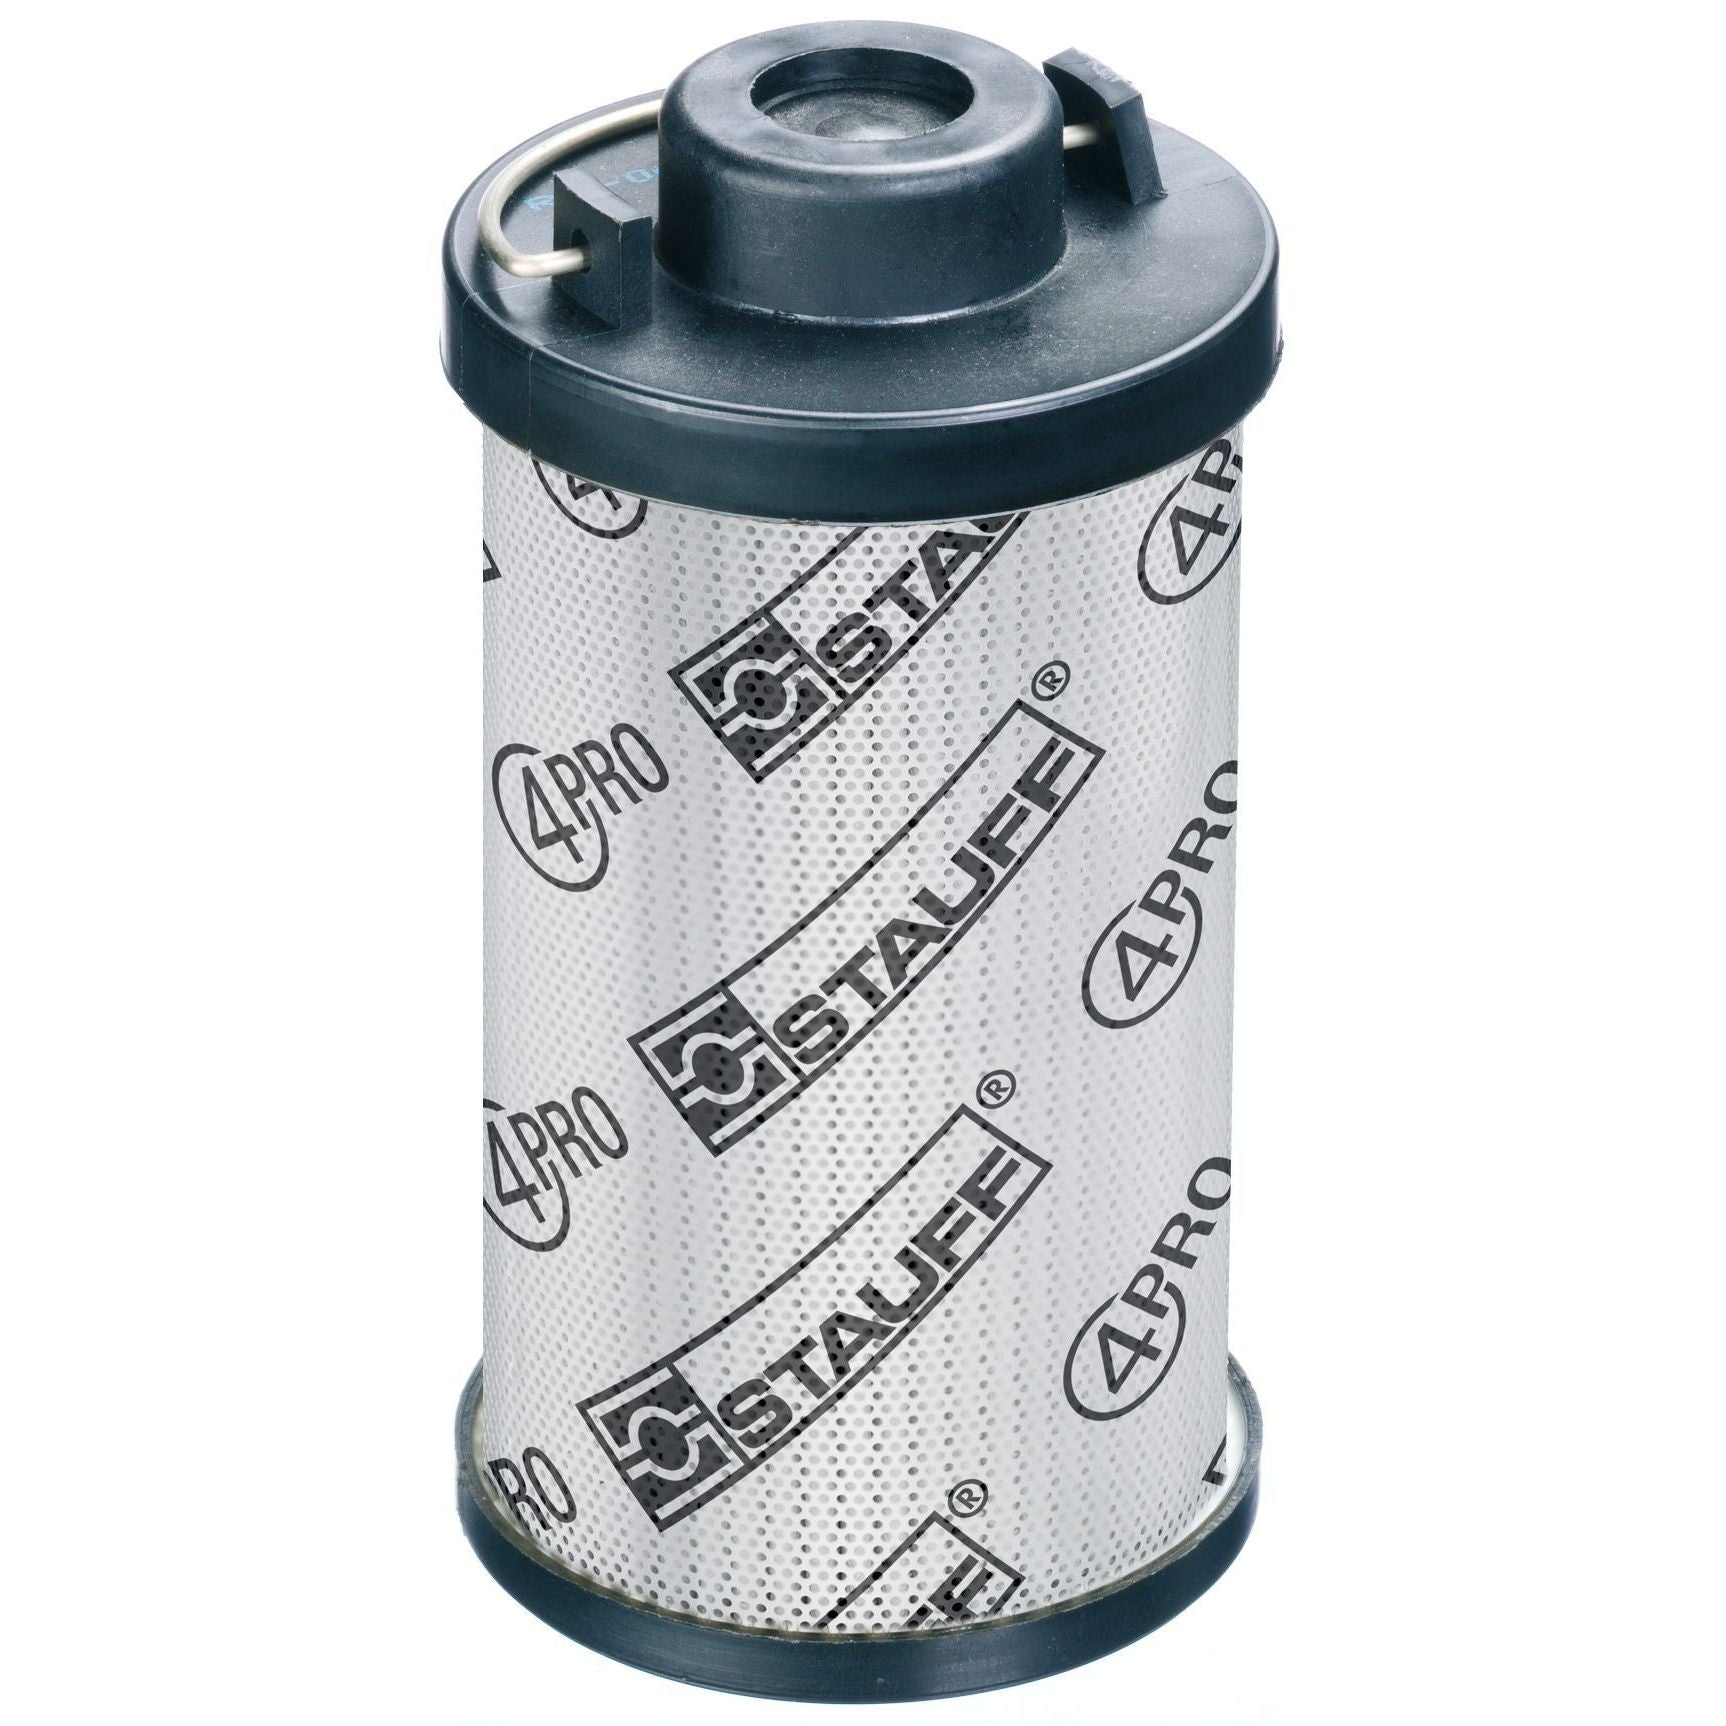 RE-160-G-10-B-B3/4 : Stauff RF-160 Series Filter Element, 10 Micron, Synthetic, 363psi Collapse Differential, Buna